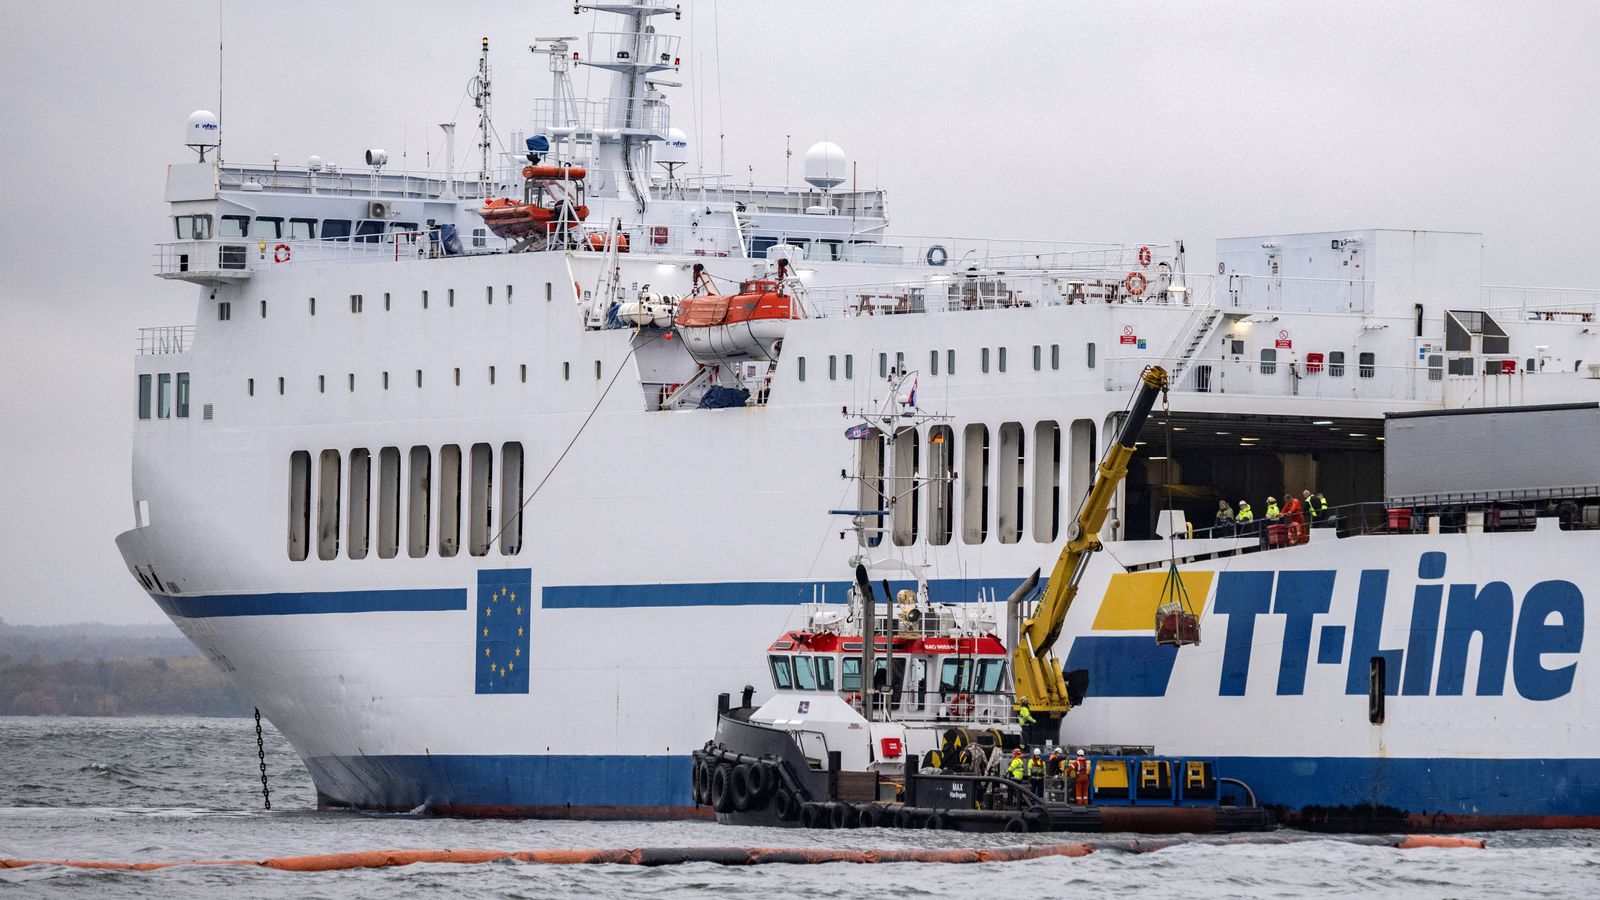 Stricken Marco Polo ferry that was leaking oil into Baltic Sea pulled free - as new oil spill found